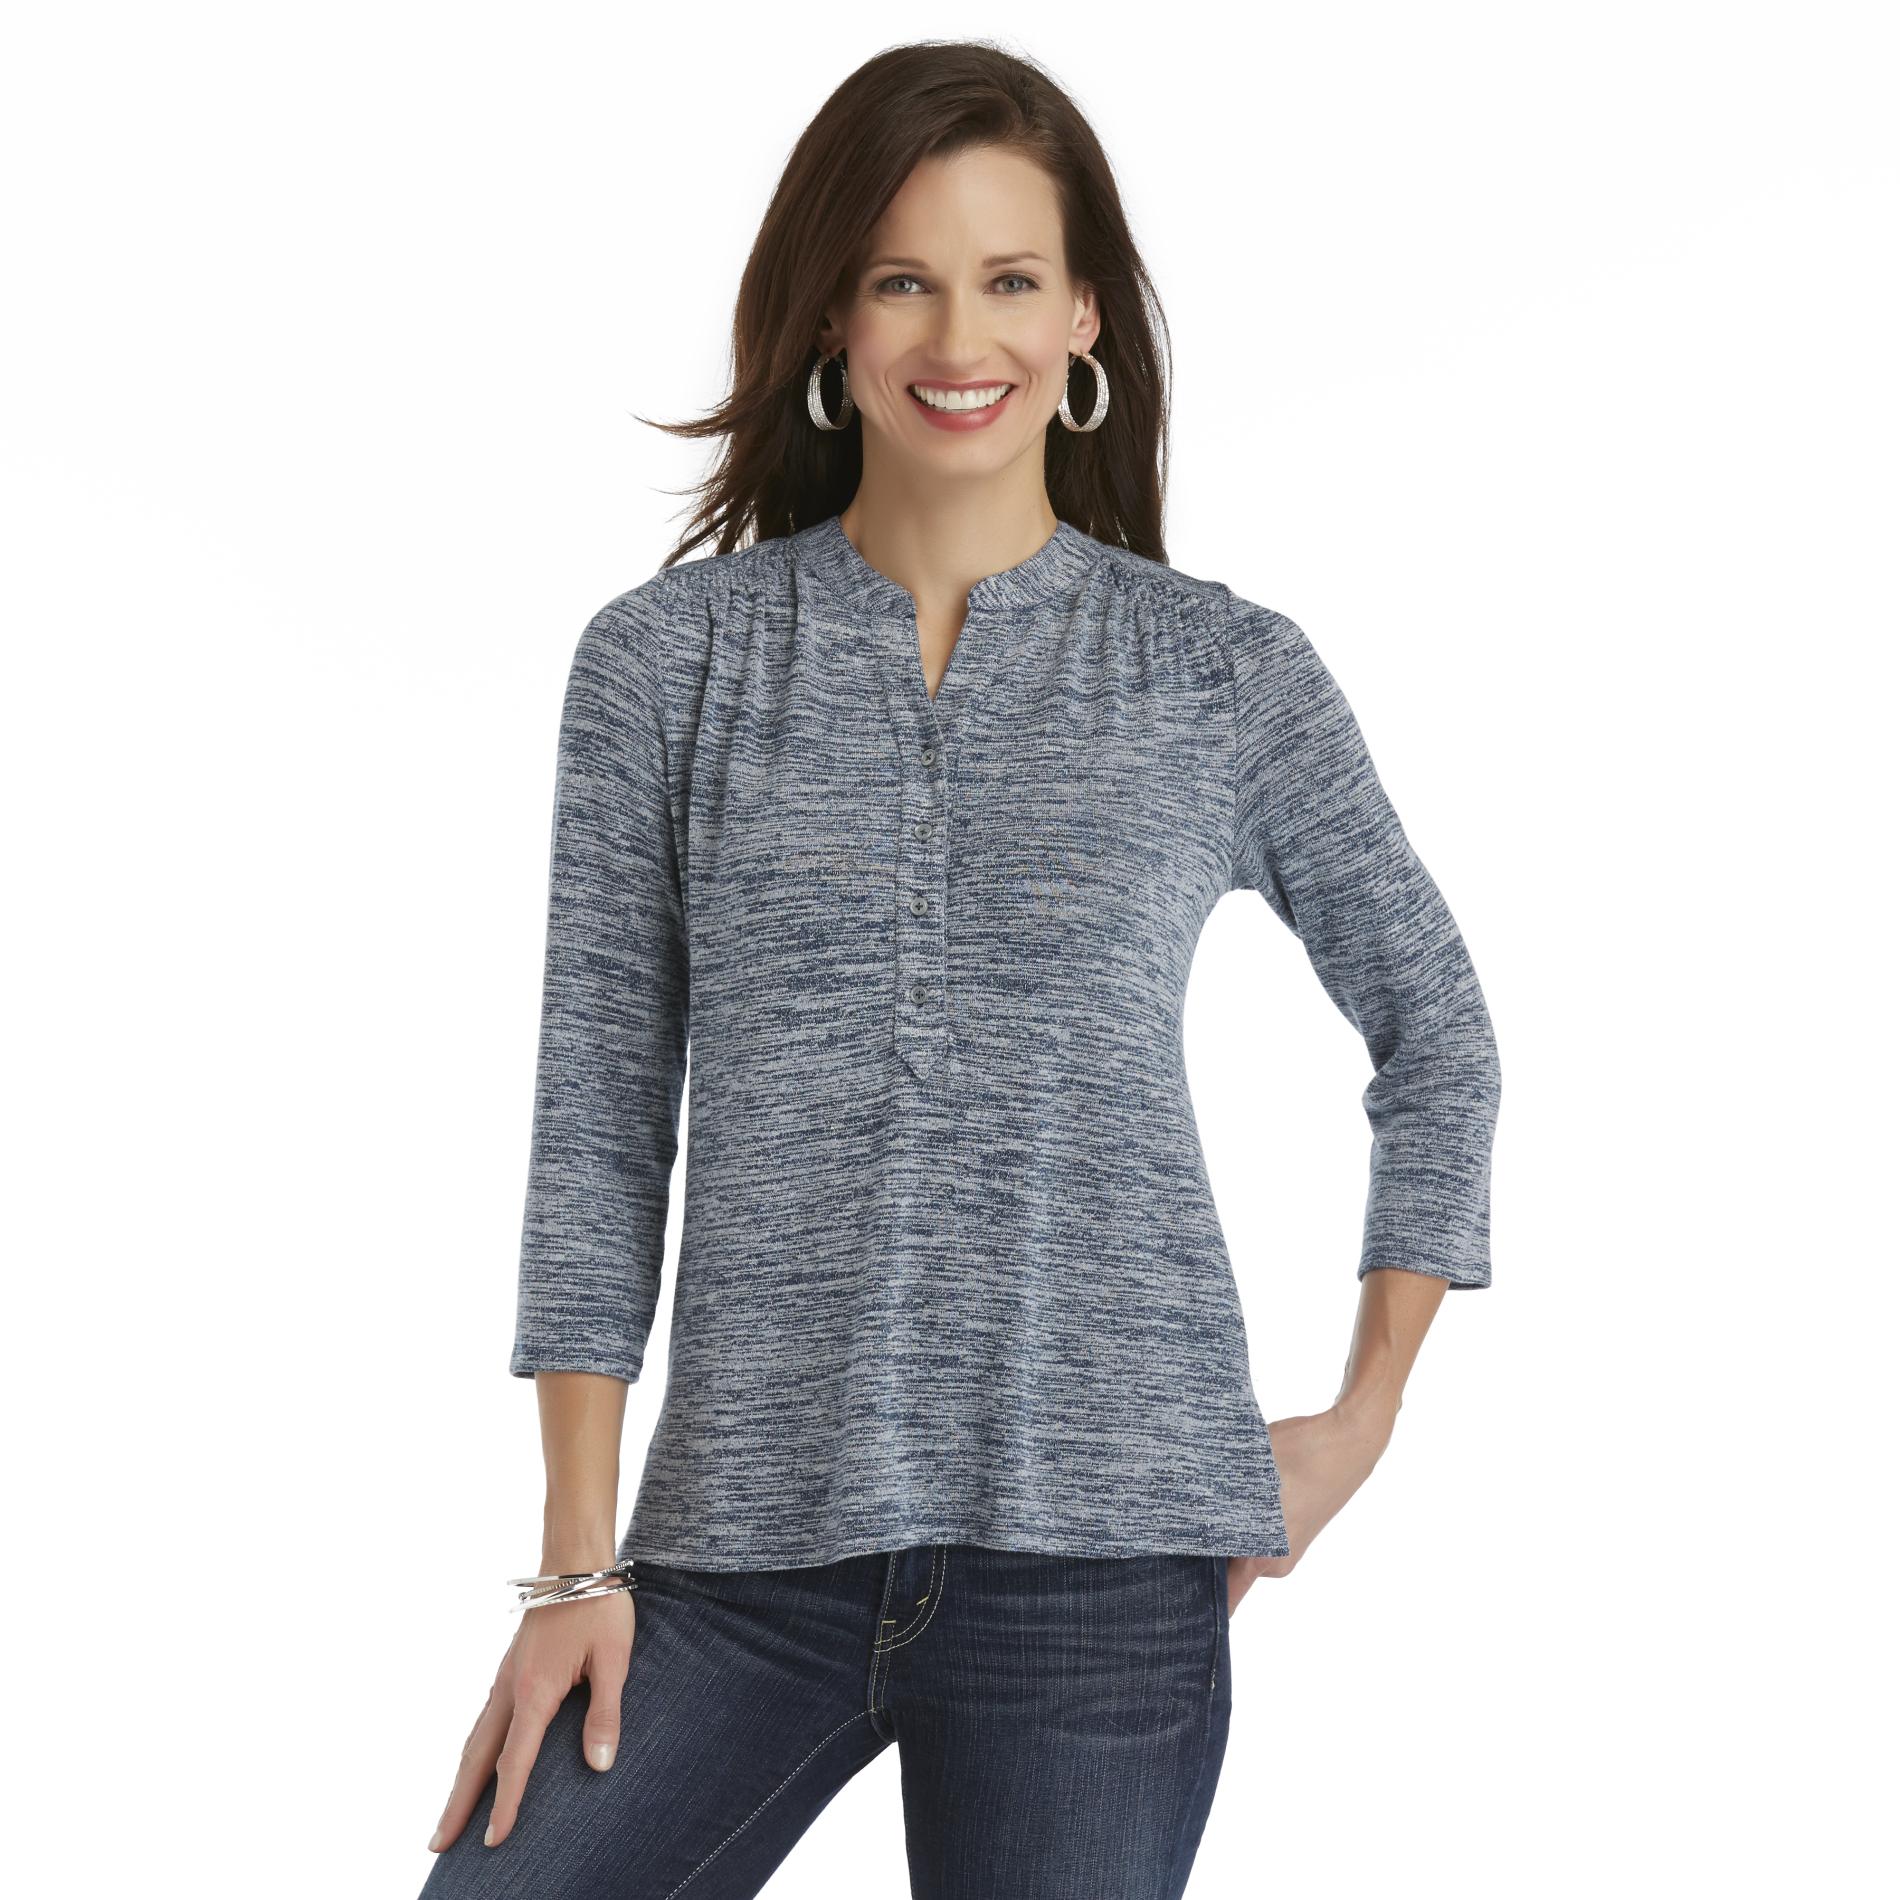 Jaclyn Smith Women's Knit Top - Space-Dyed